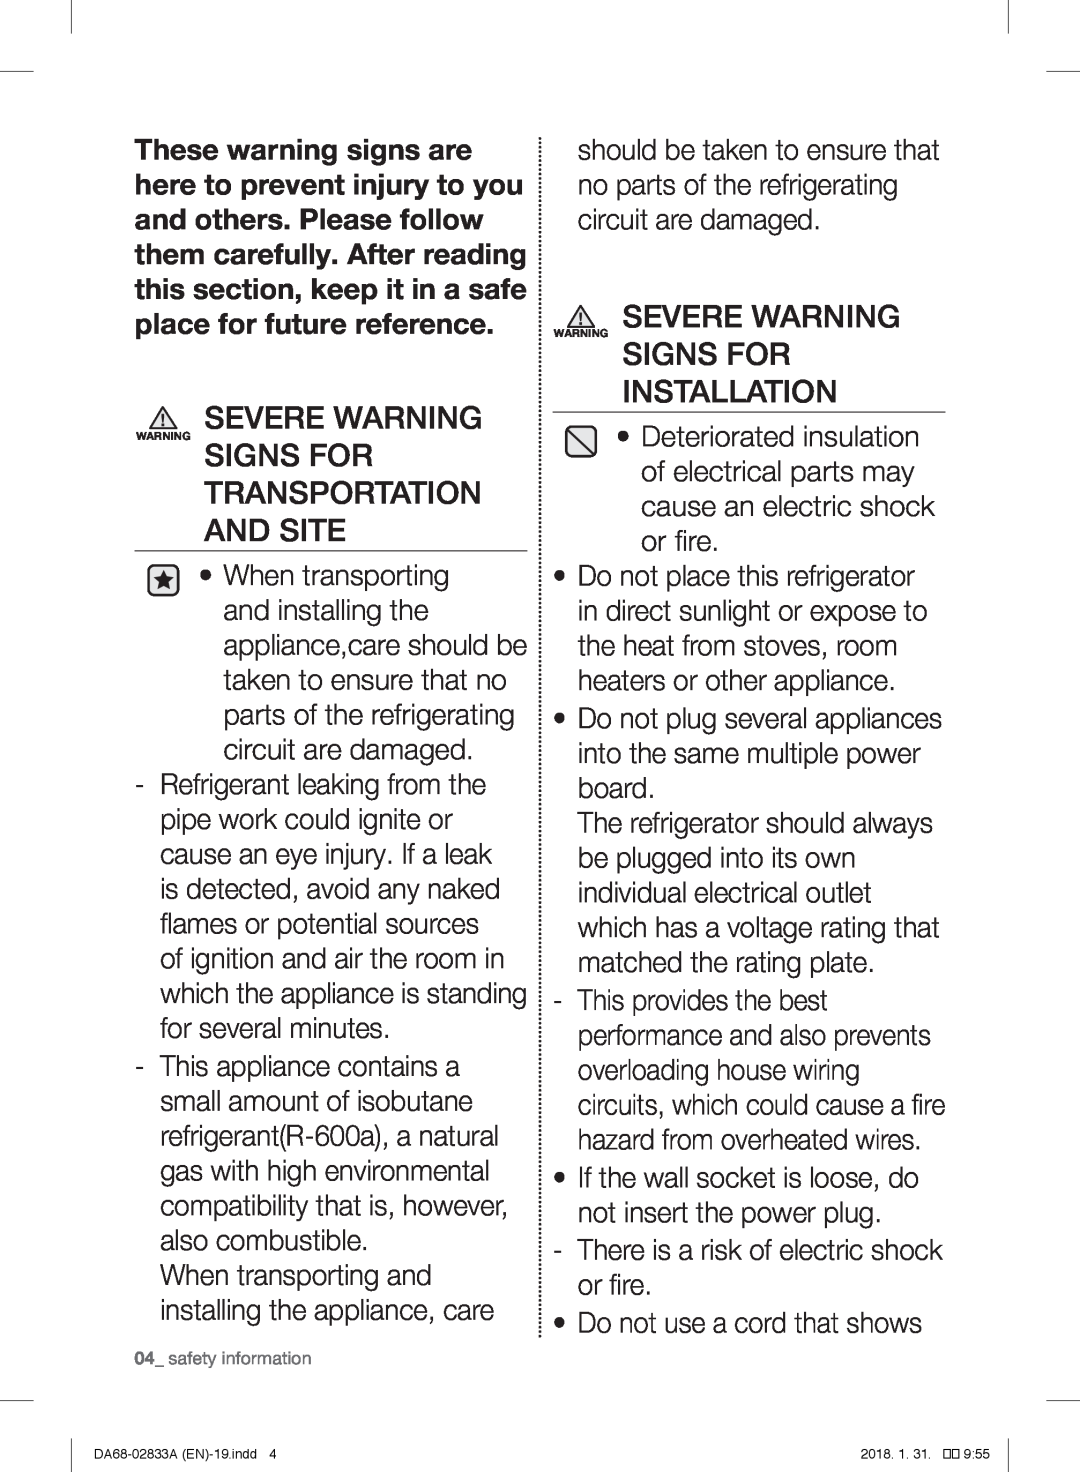 Samsung RB31FEJNCSS/EF, RL56GHGMG1/XEF manual Severe Warning Warning Signs For Installation, Transportation And Site 